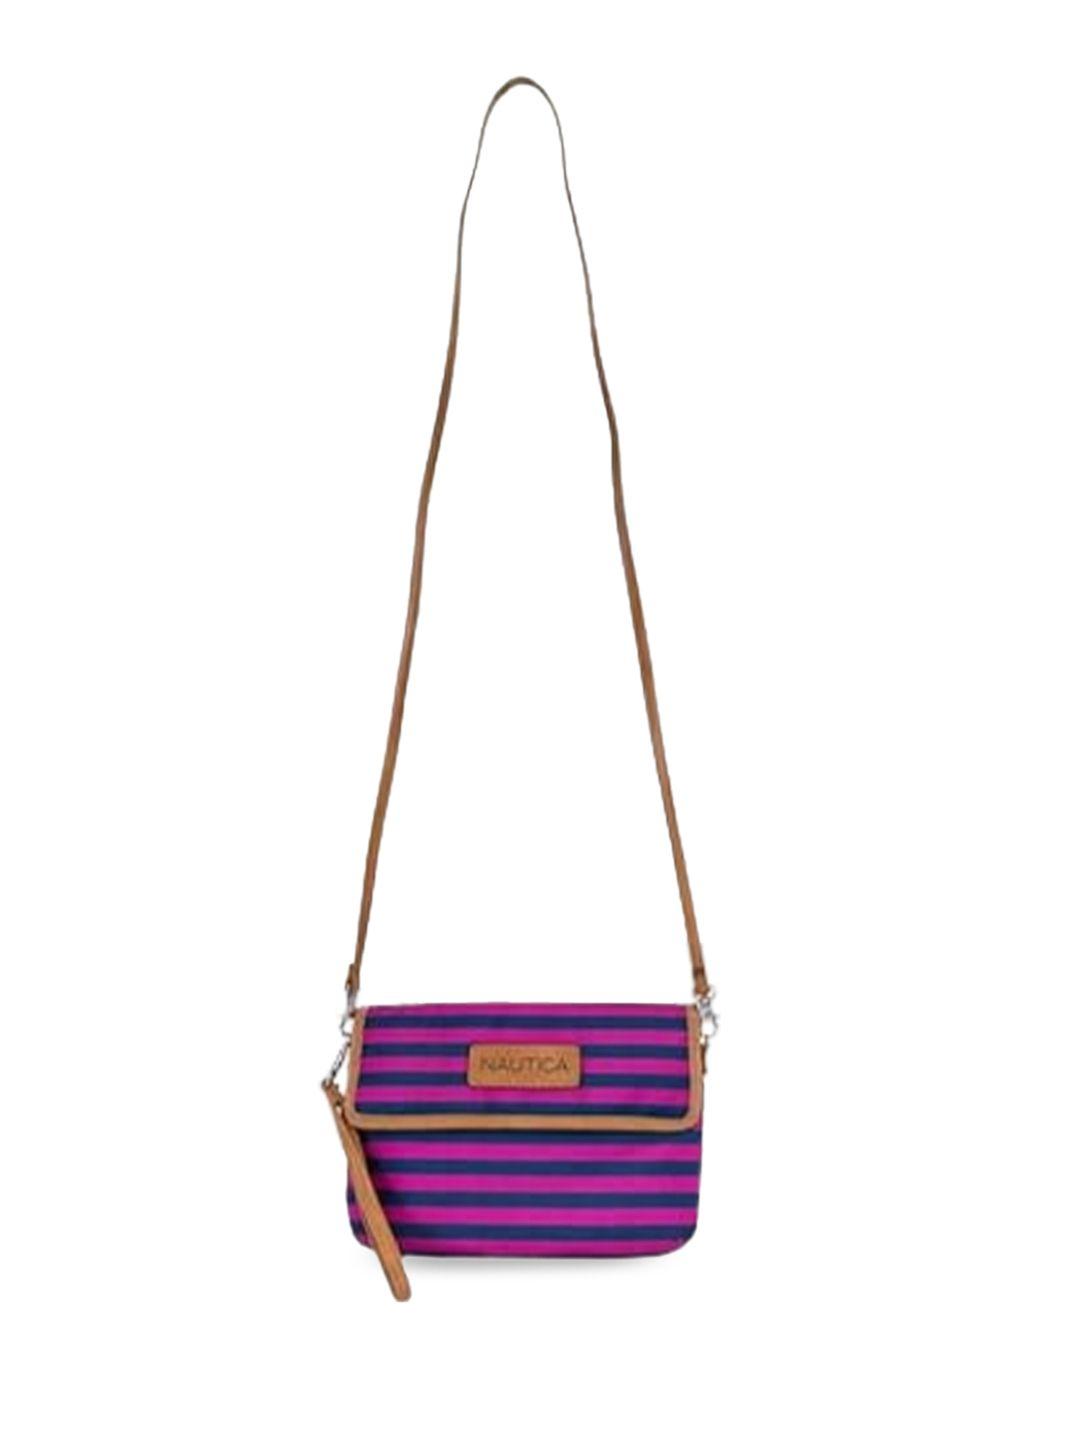 nautica striped structured sling bag